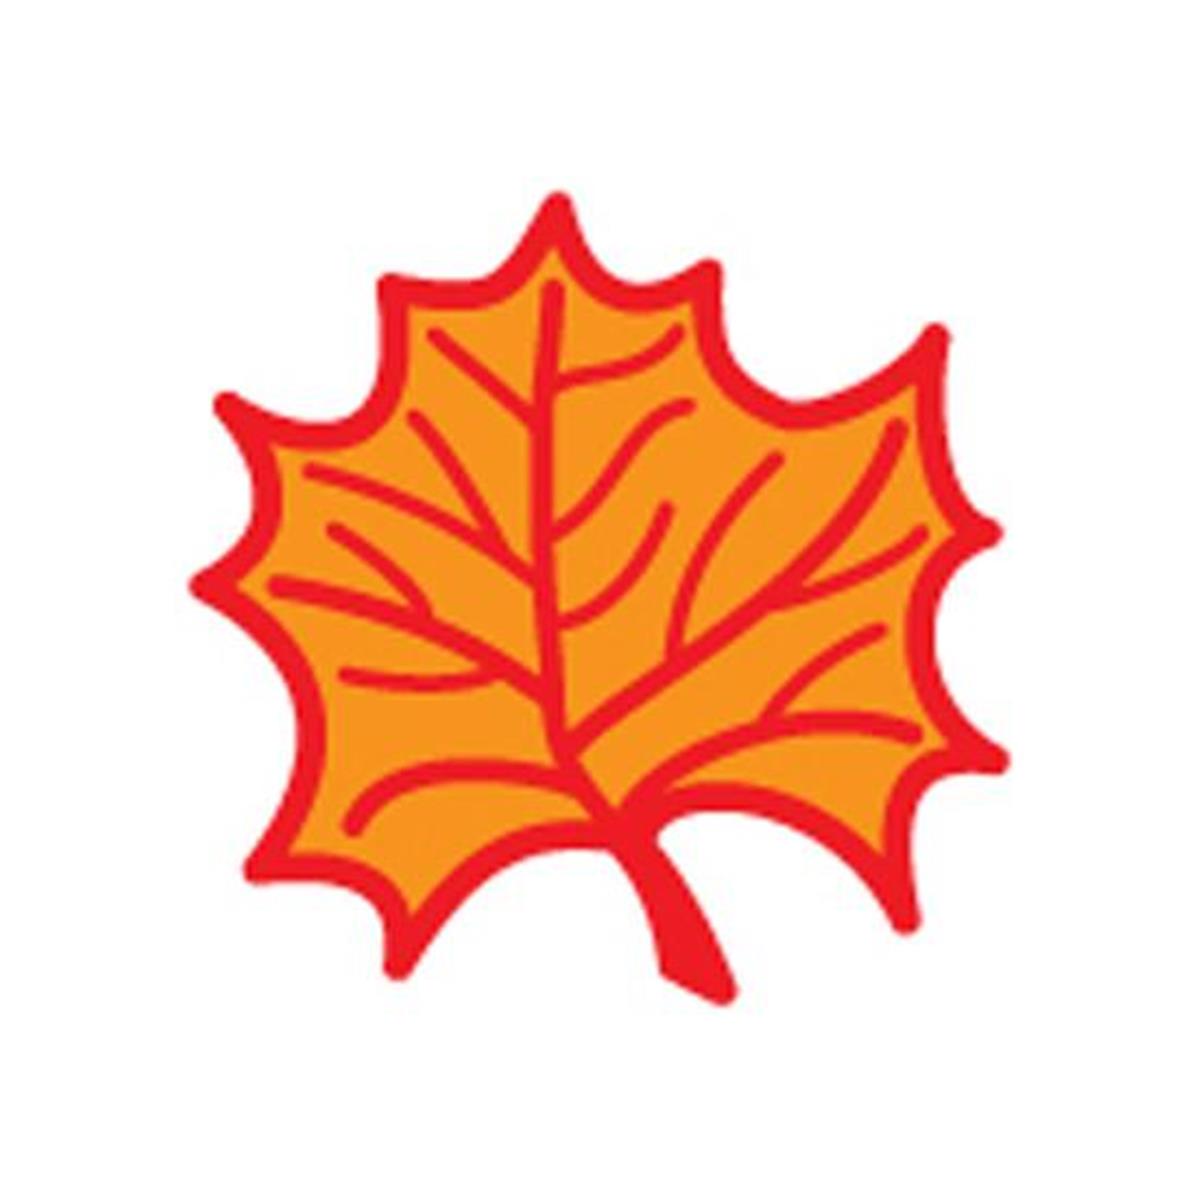 Picture of Creative Shapes Etc SE-0445 0.5 x 0.5 in. Incentive Stamp - Maple Leaf